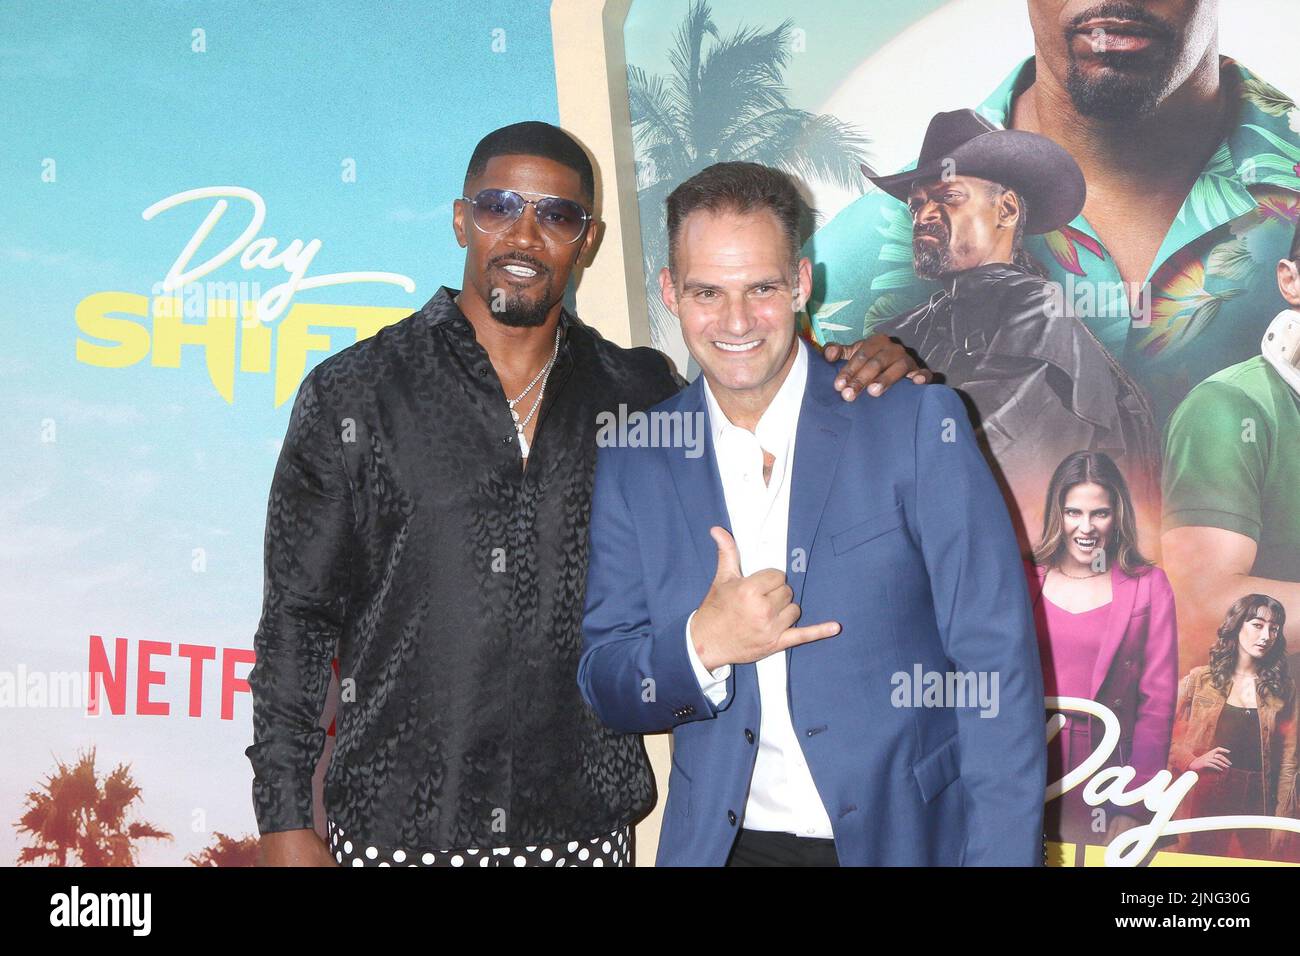 Los Angeles, CA. 10th Aug, 2022. Jamie Foxx, J.J. Perry at arrivals for DAY SHIFT Premiere on NETFLIX, Regal LA Live, Los Angeles, CA August 10, 2022. Credit: Priscilla Grant/Everett Collection/Alamy Live News Stock Photo